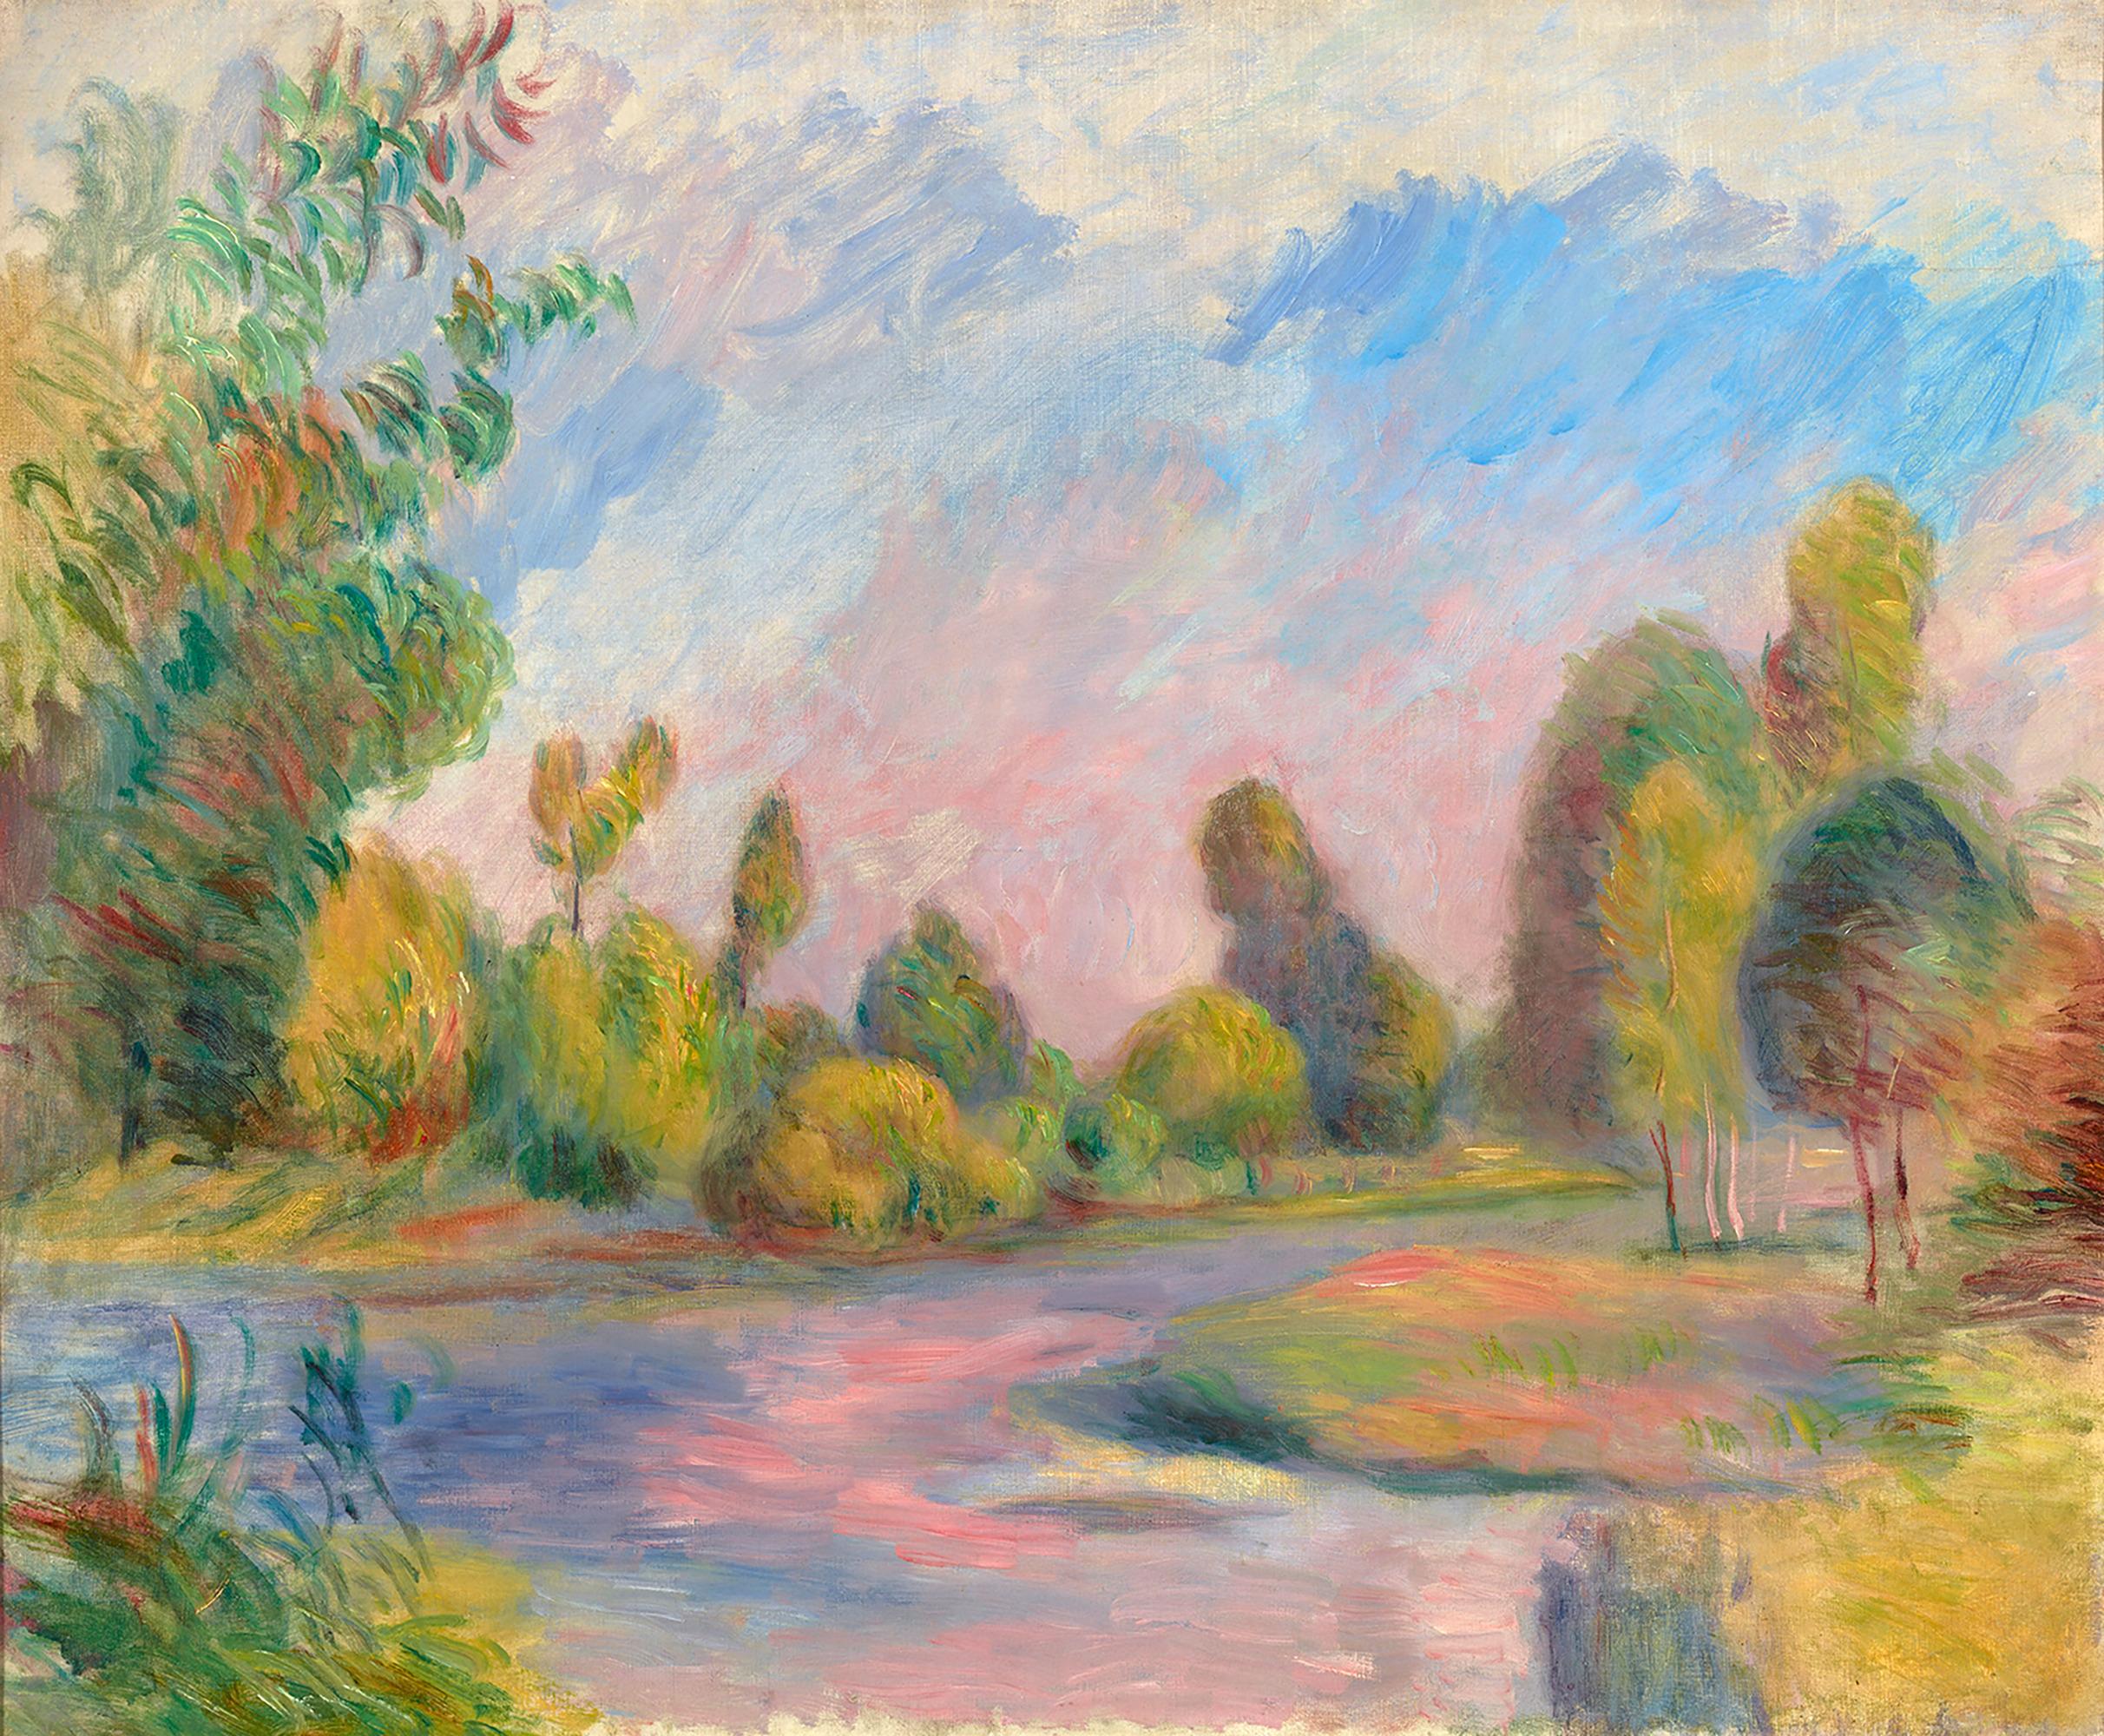 What is Pierre-Auguste Renoir known for?